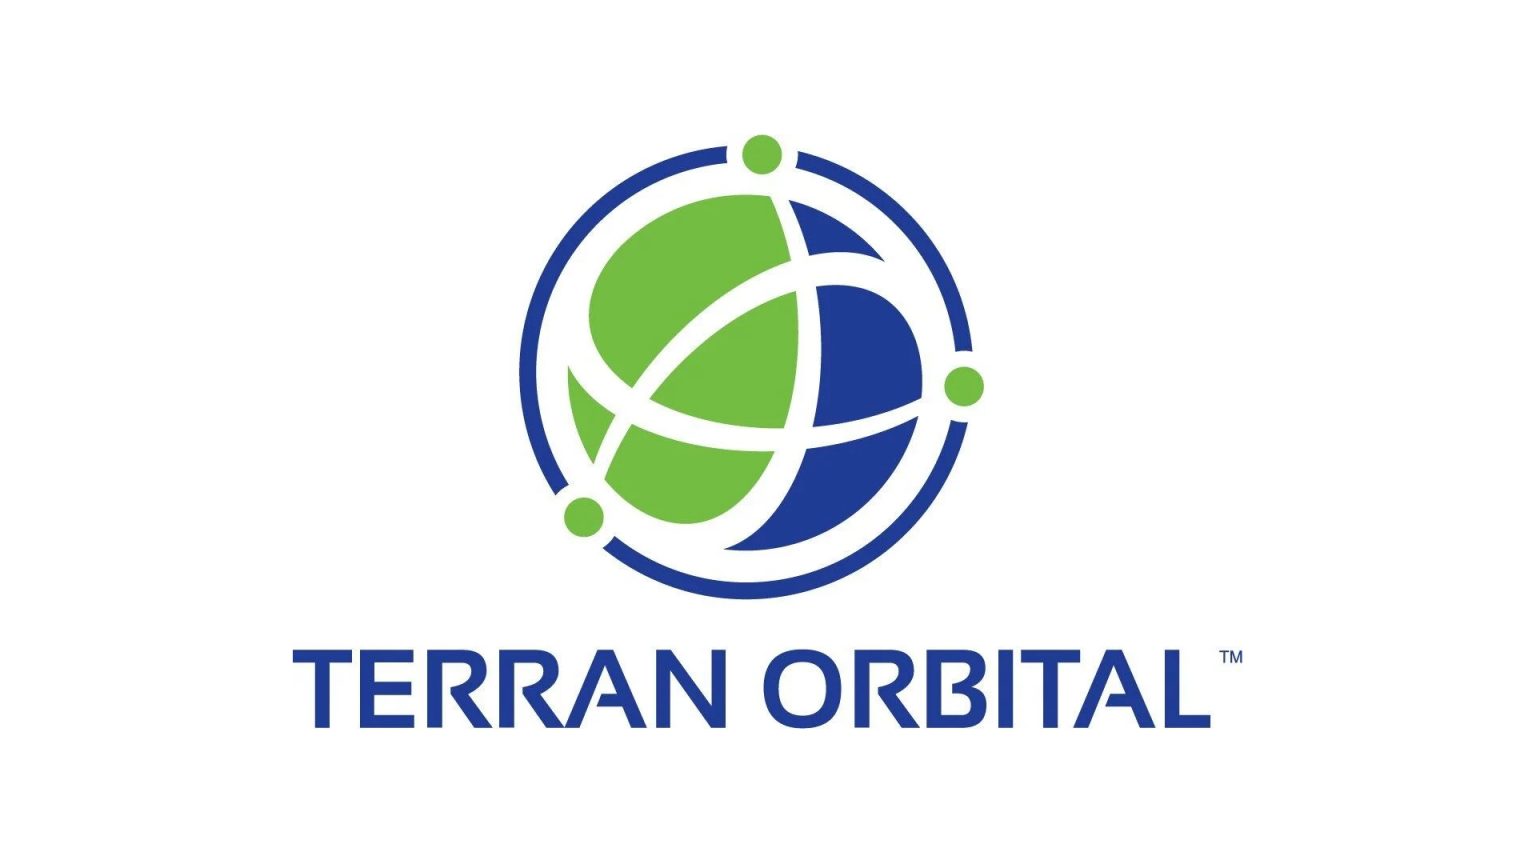 terran-orbital-receives-major-payment-from-rivada-space-boosts-year-end-cash-balance